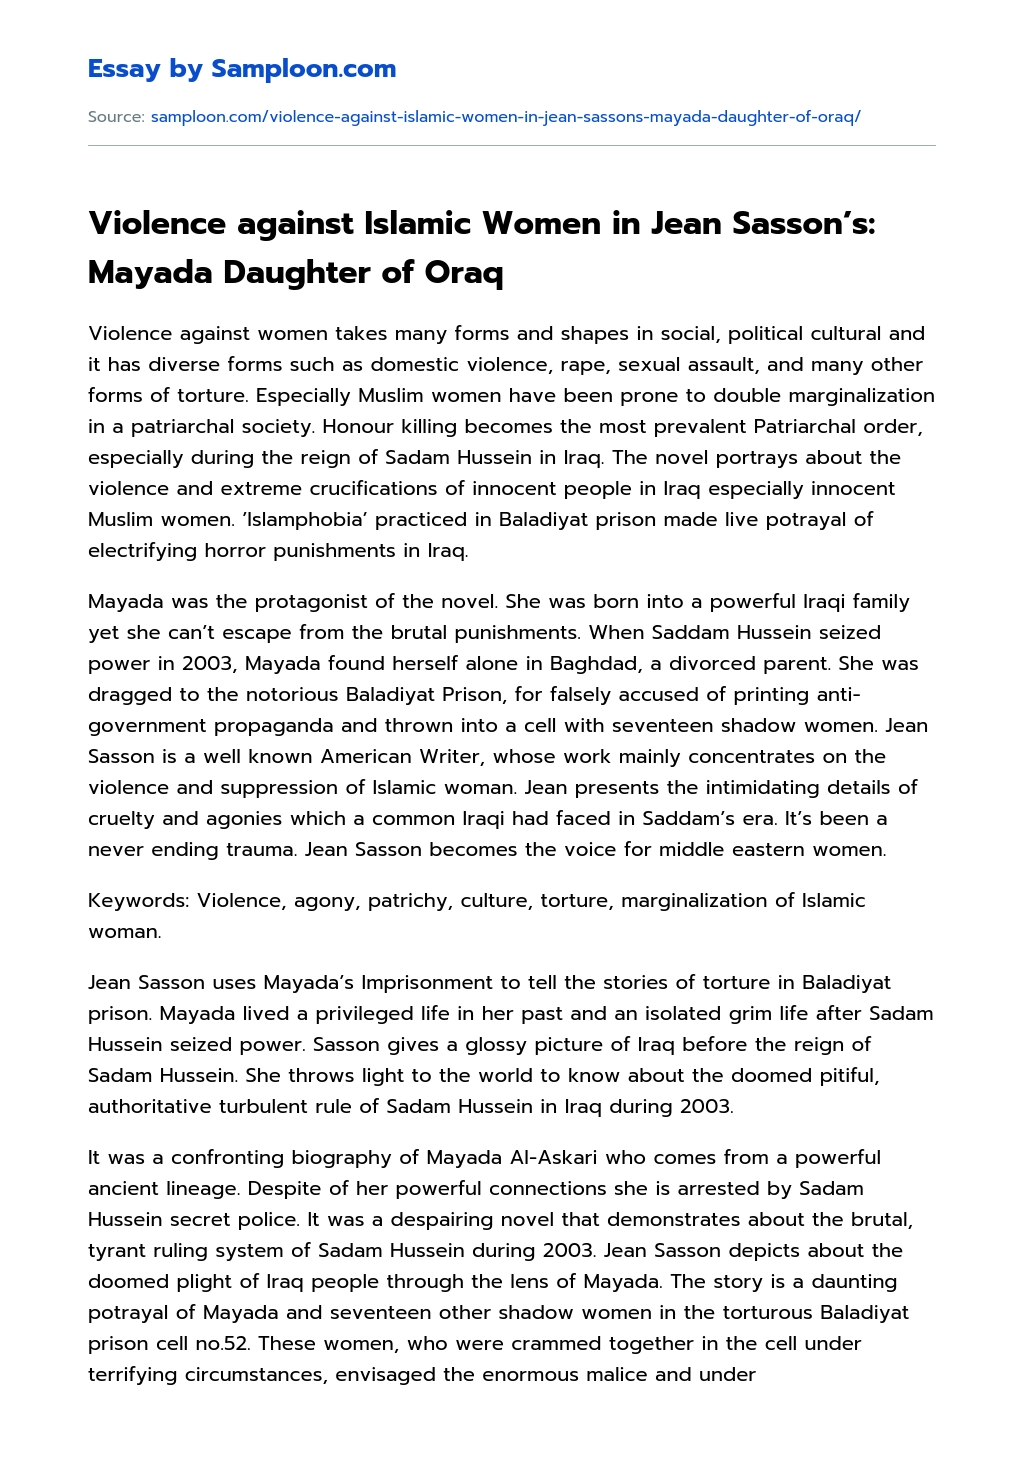 Violence against Islamic Women in Jean Sasson’s: Mayada Daughter of Oraq essay